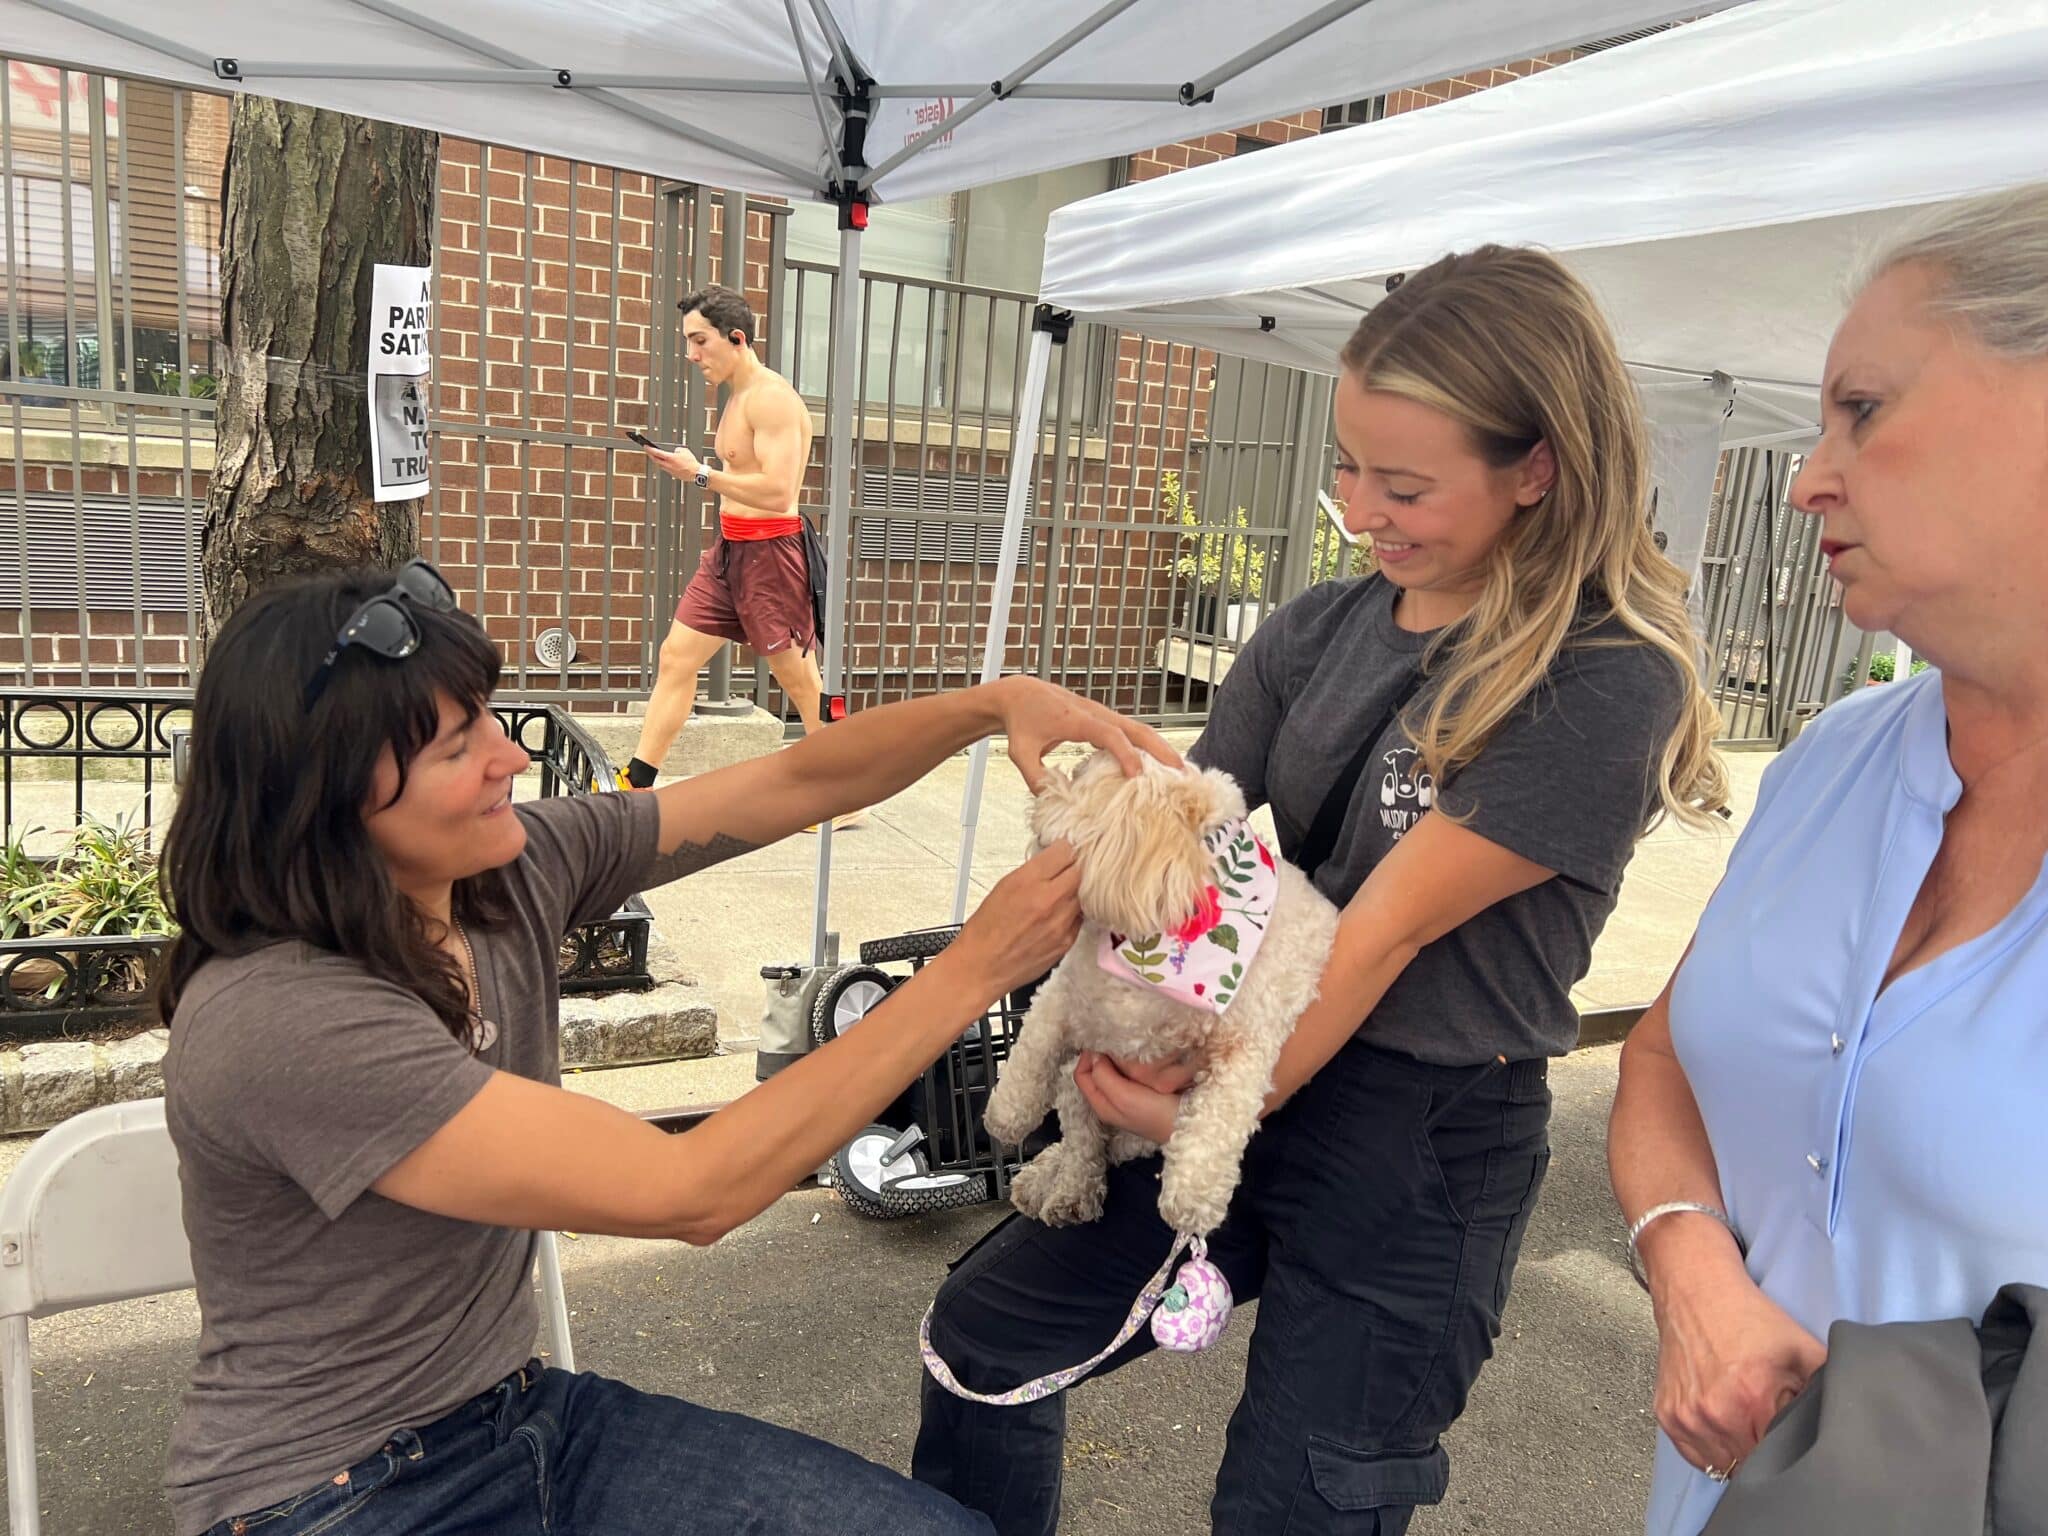 Dr. Heather Brausa examining the teeth of a dog at the Muddy Paws Block Party.